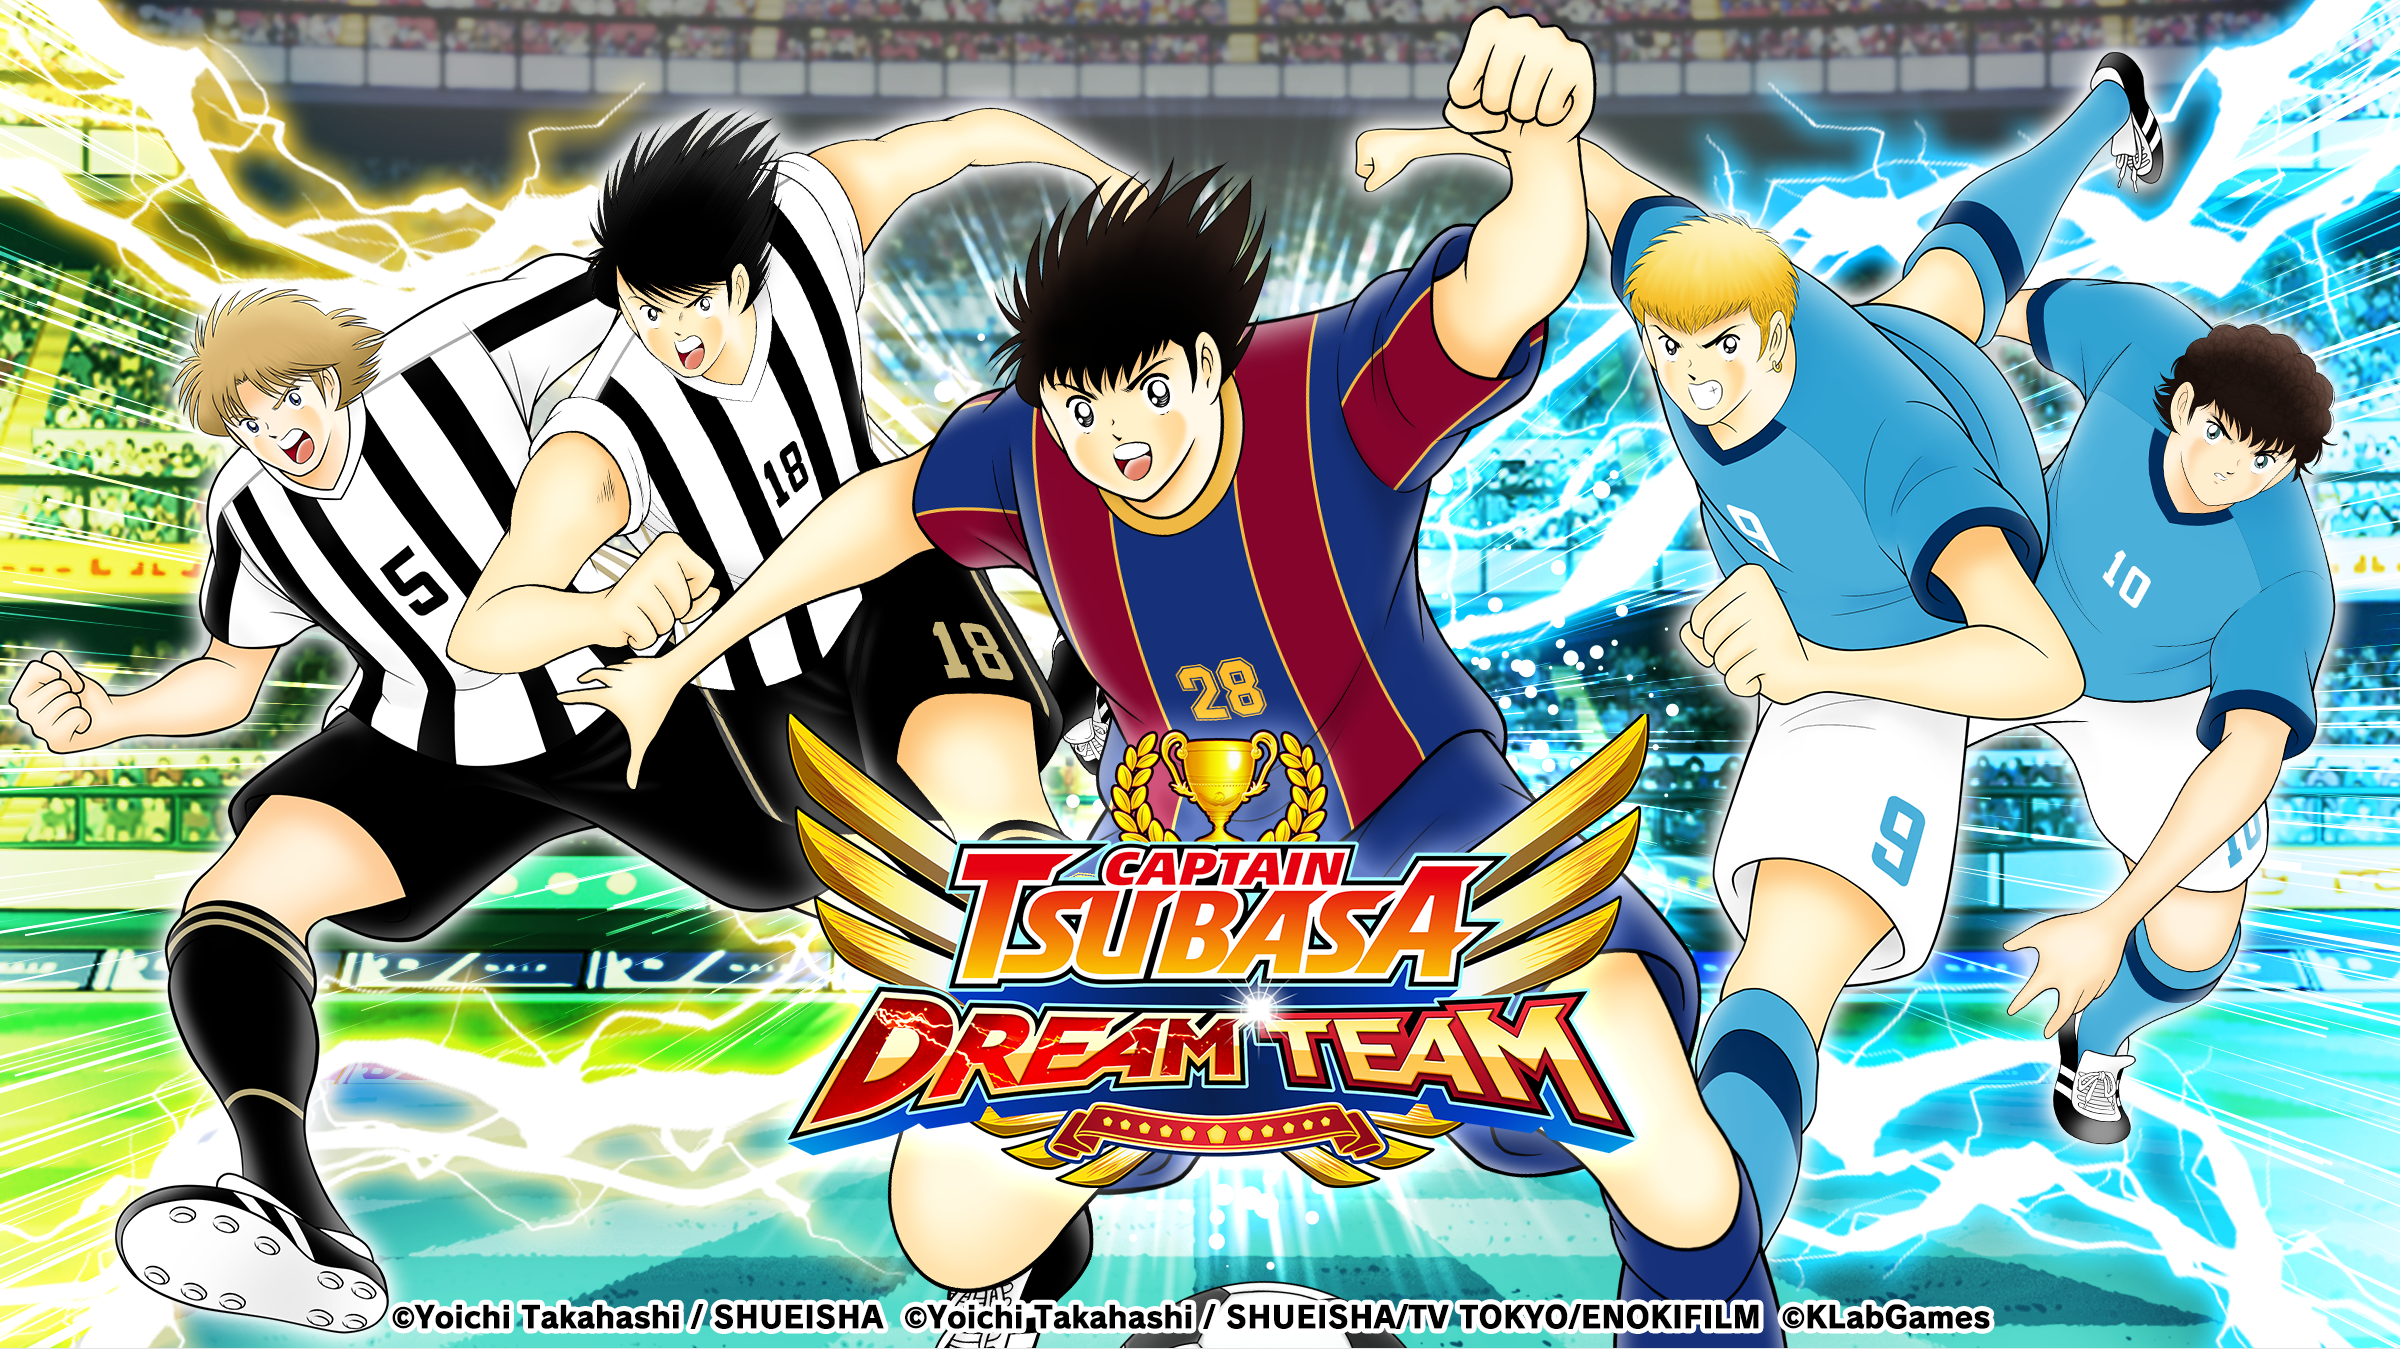 About: Guide for Dream Winner Soccer 2020 (Google Play version